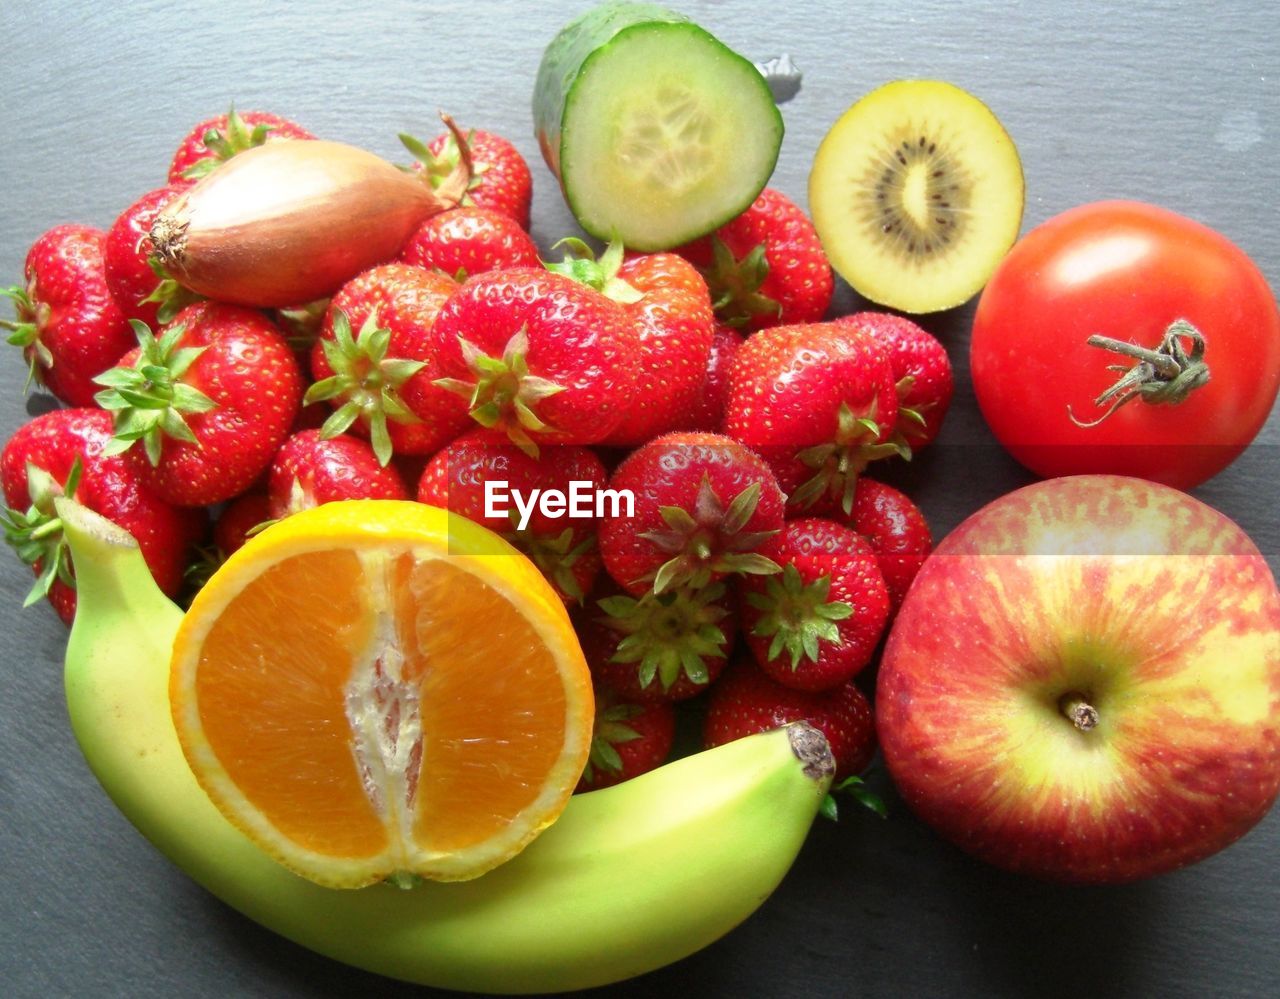 HIGH ANGLE VIEW OF APPLES AND FRUITS